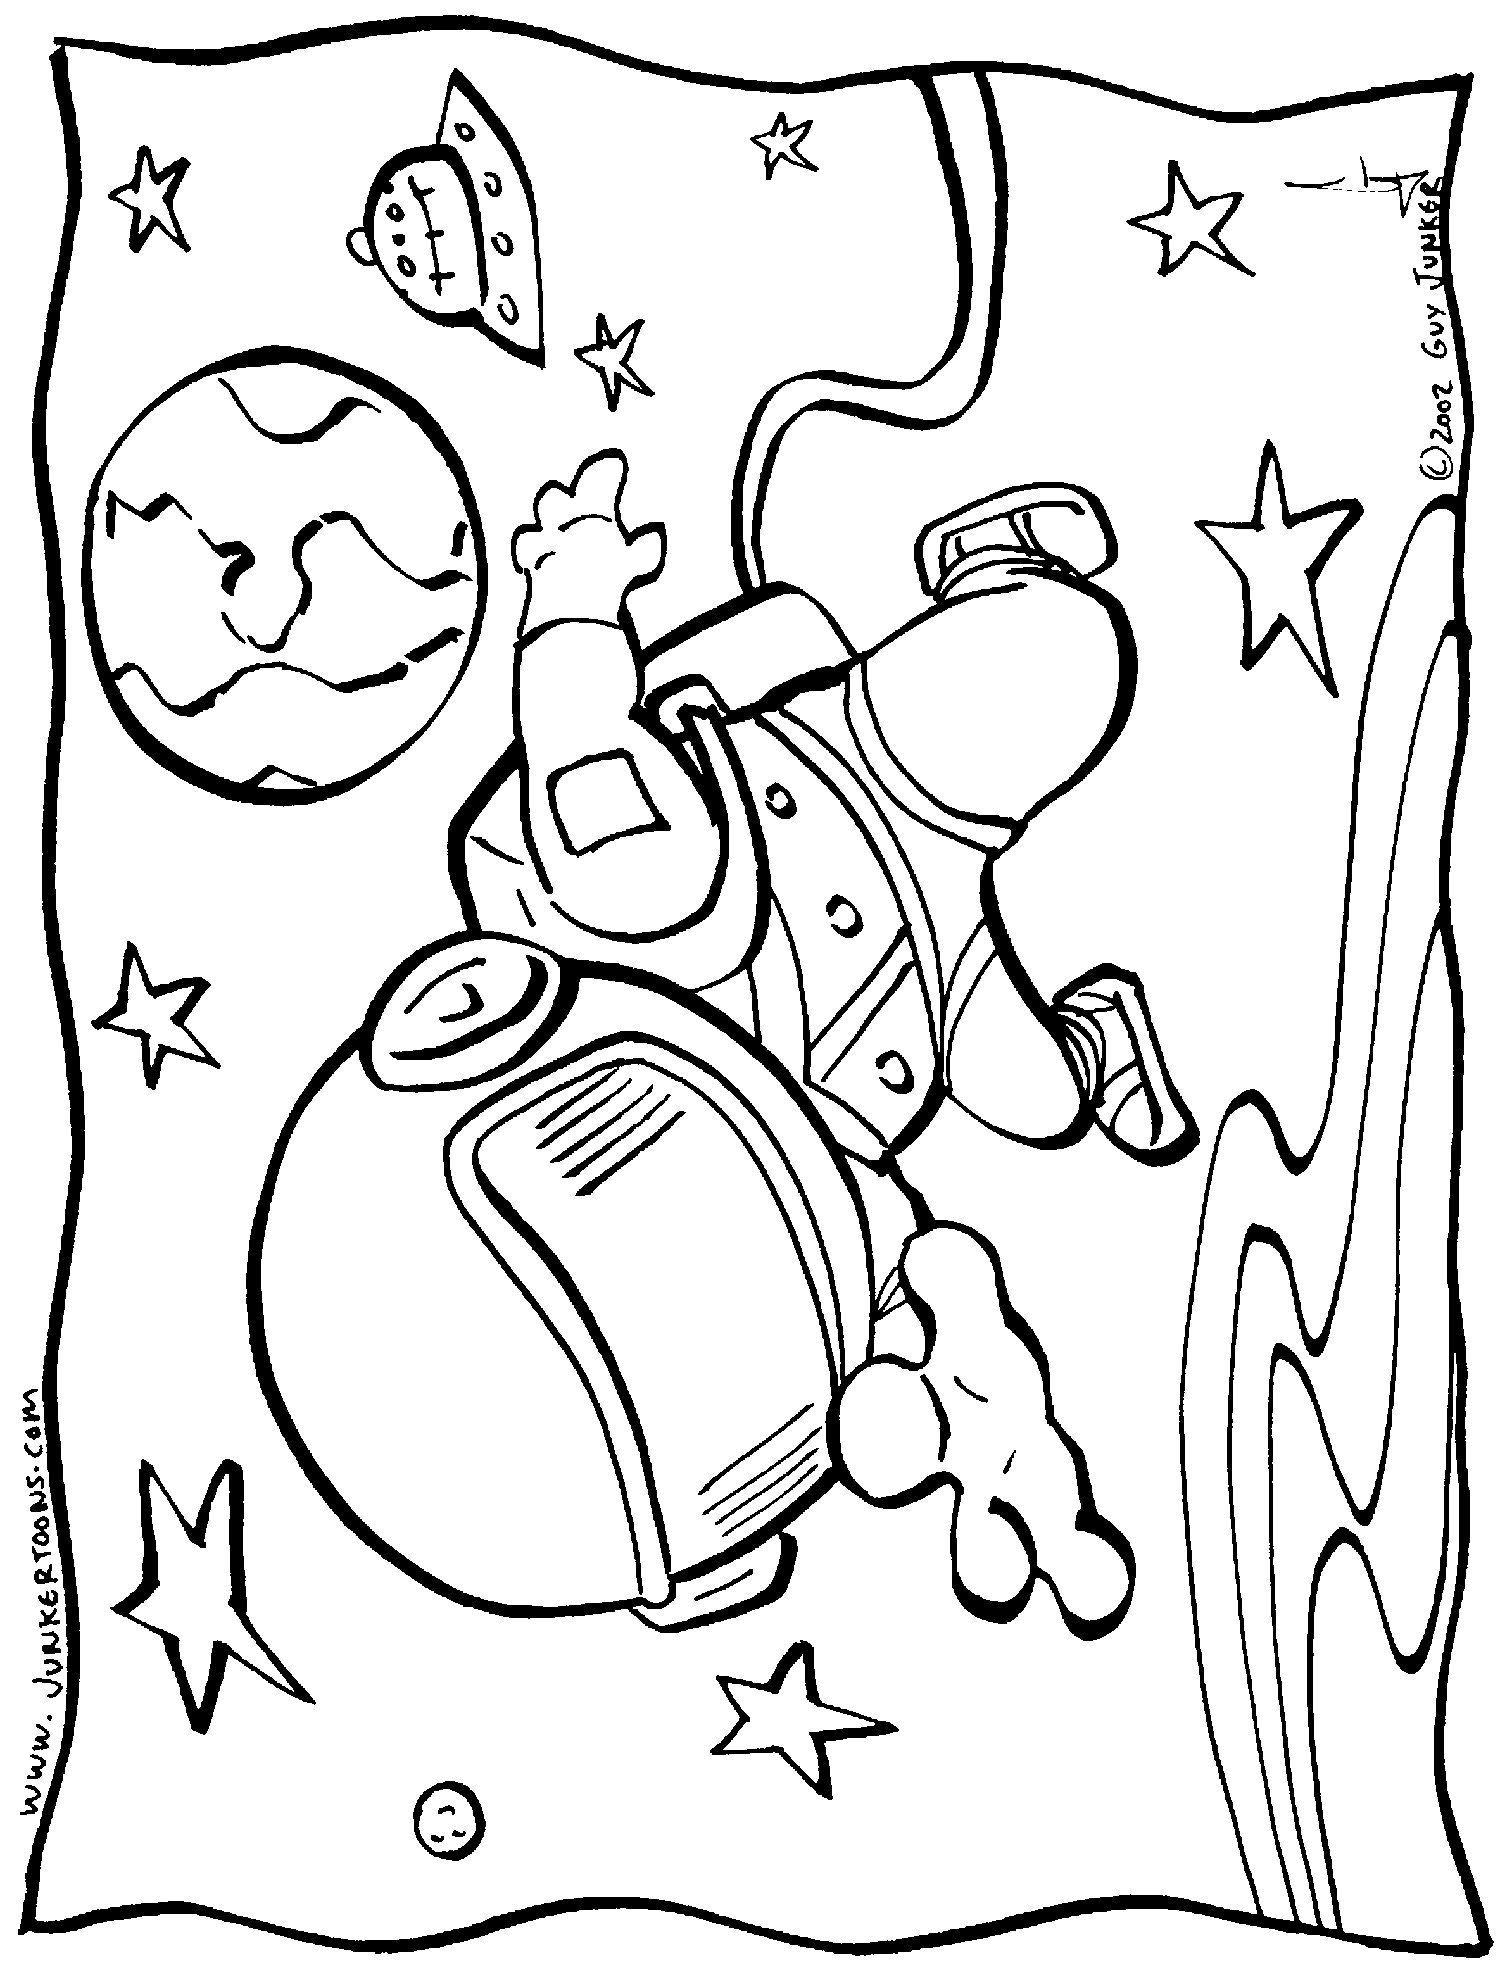 Printable Space Coloring Pages
 space coloring page Space Coloring Page 2669